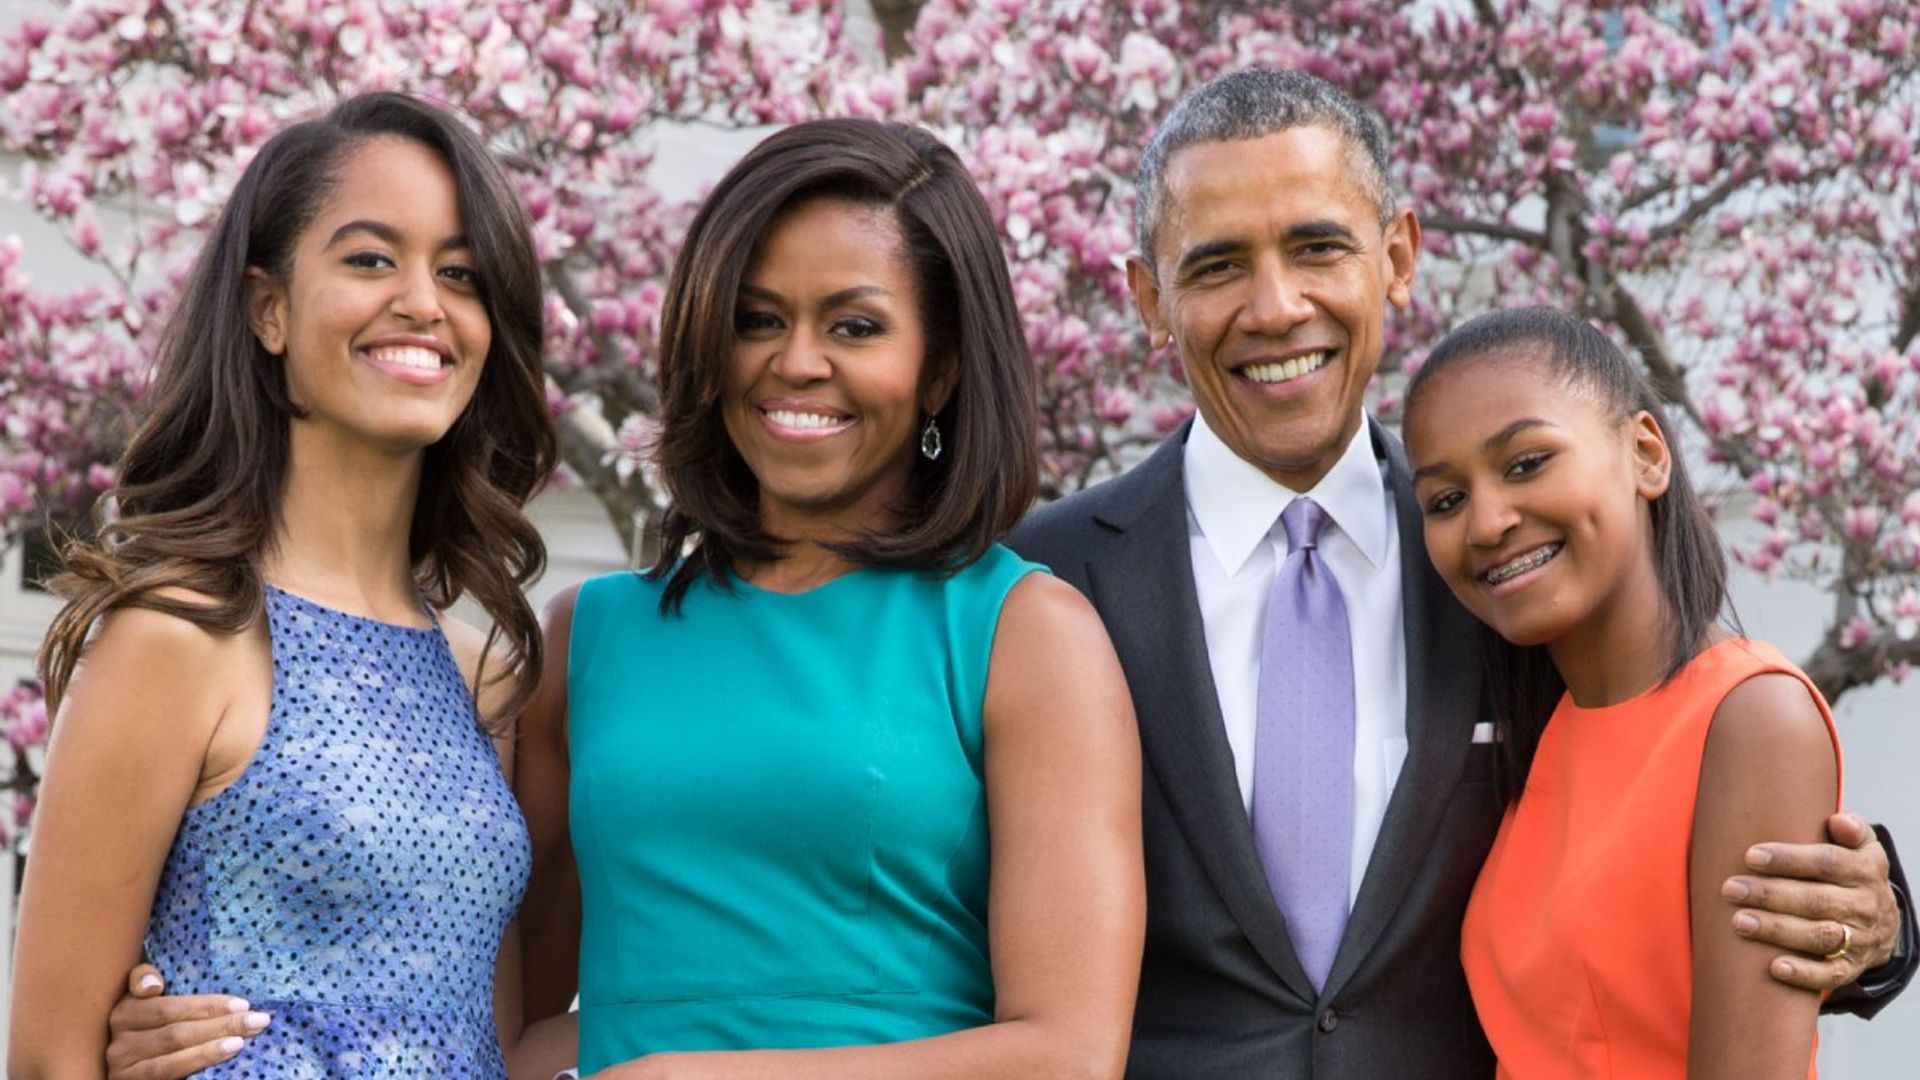 Barack Obama gets emotional as he shares story about raising black daughters